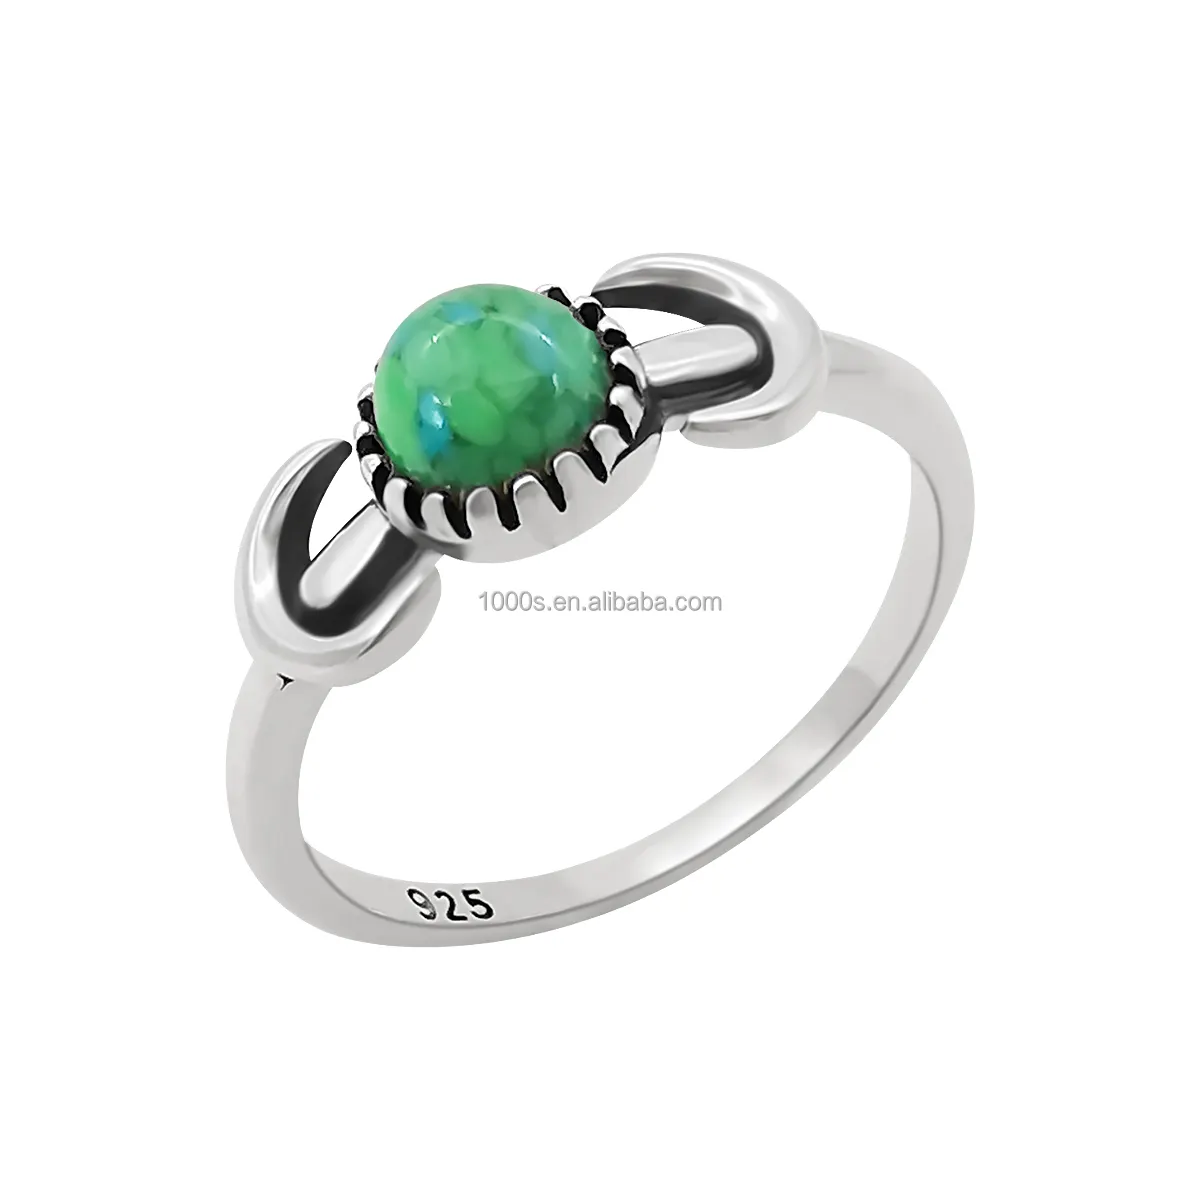 Wholesale S925 Sterling Silver Ring Classic Design For Women With Turquois Stone Jewelry